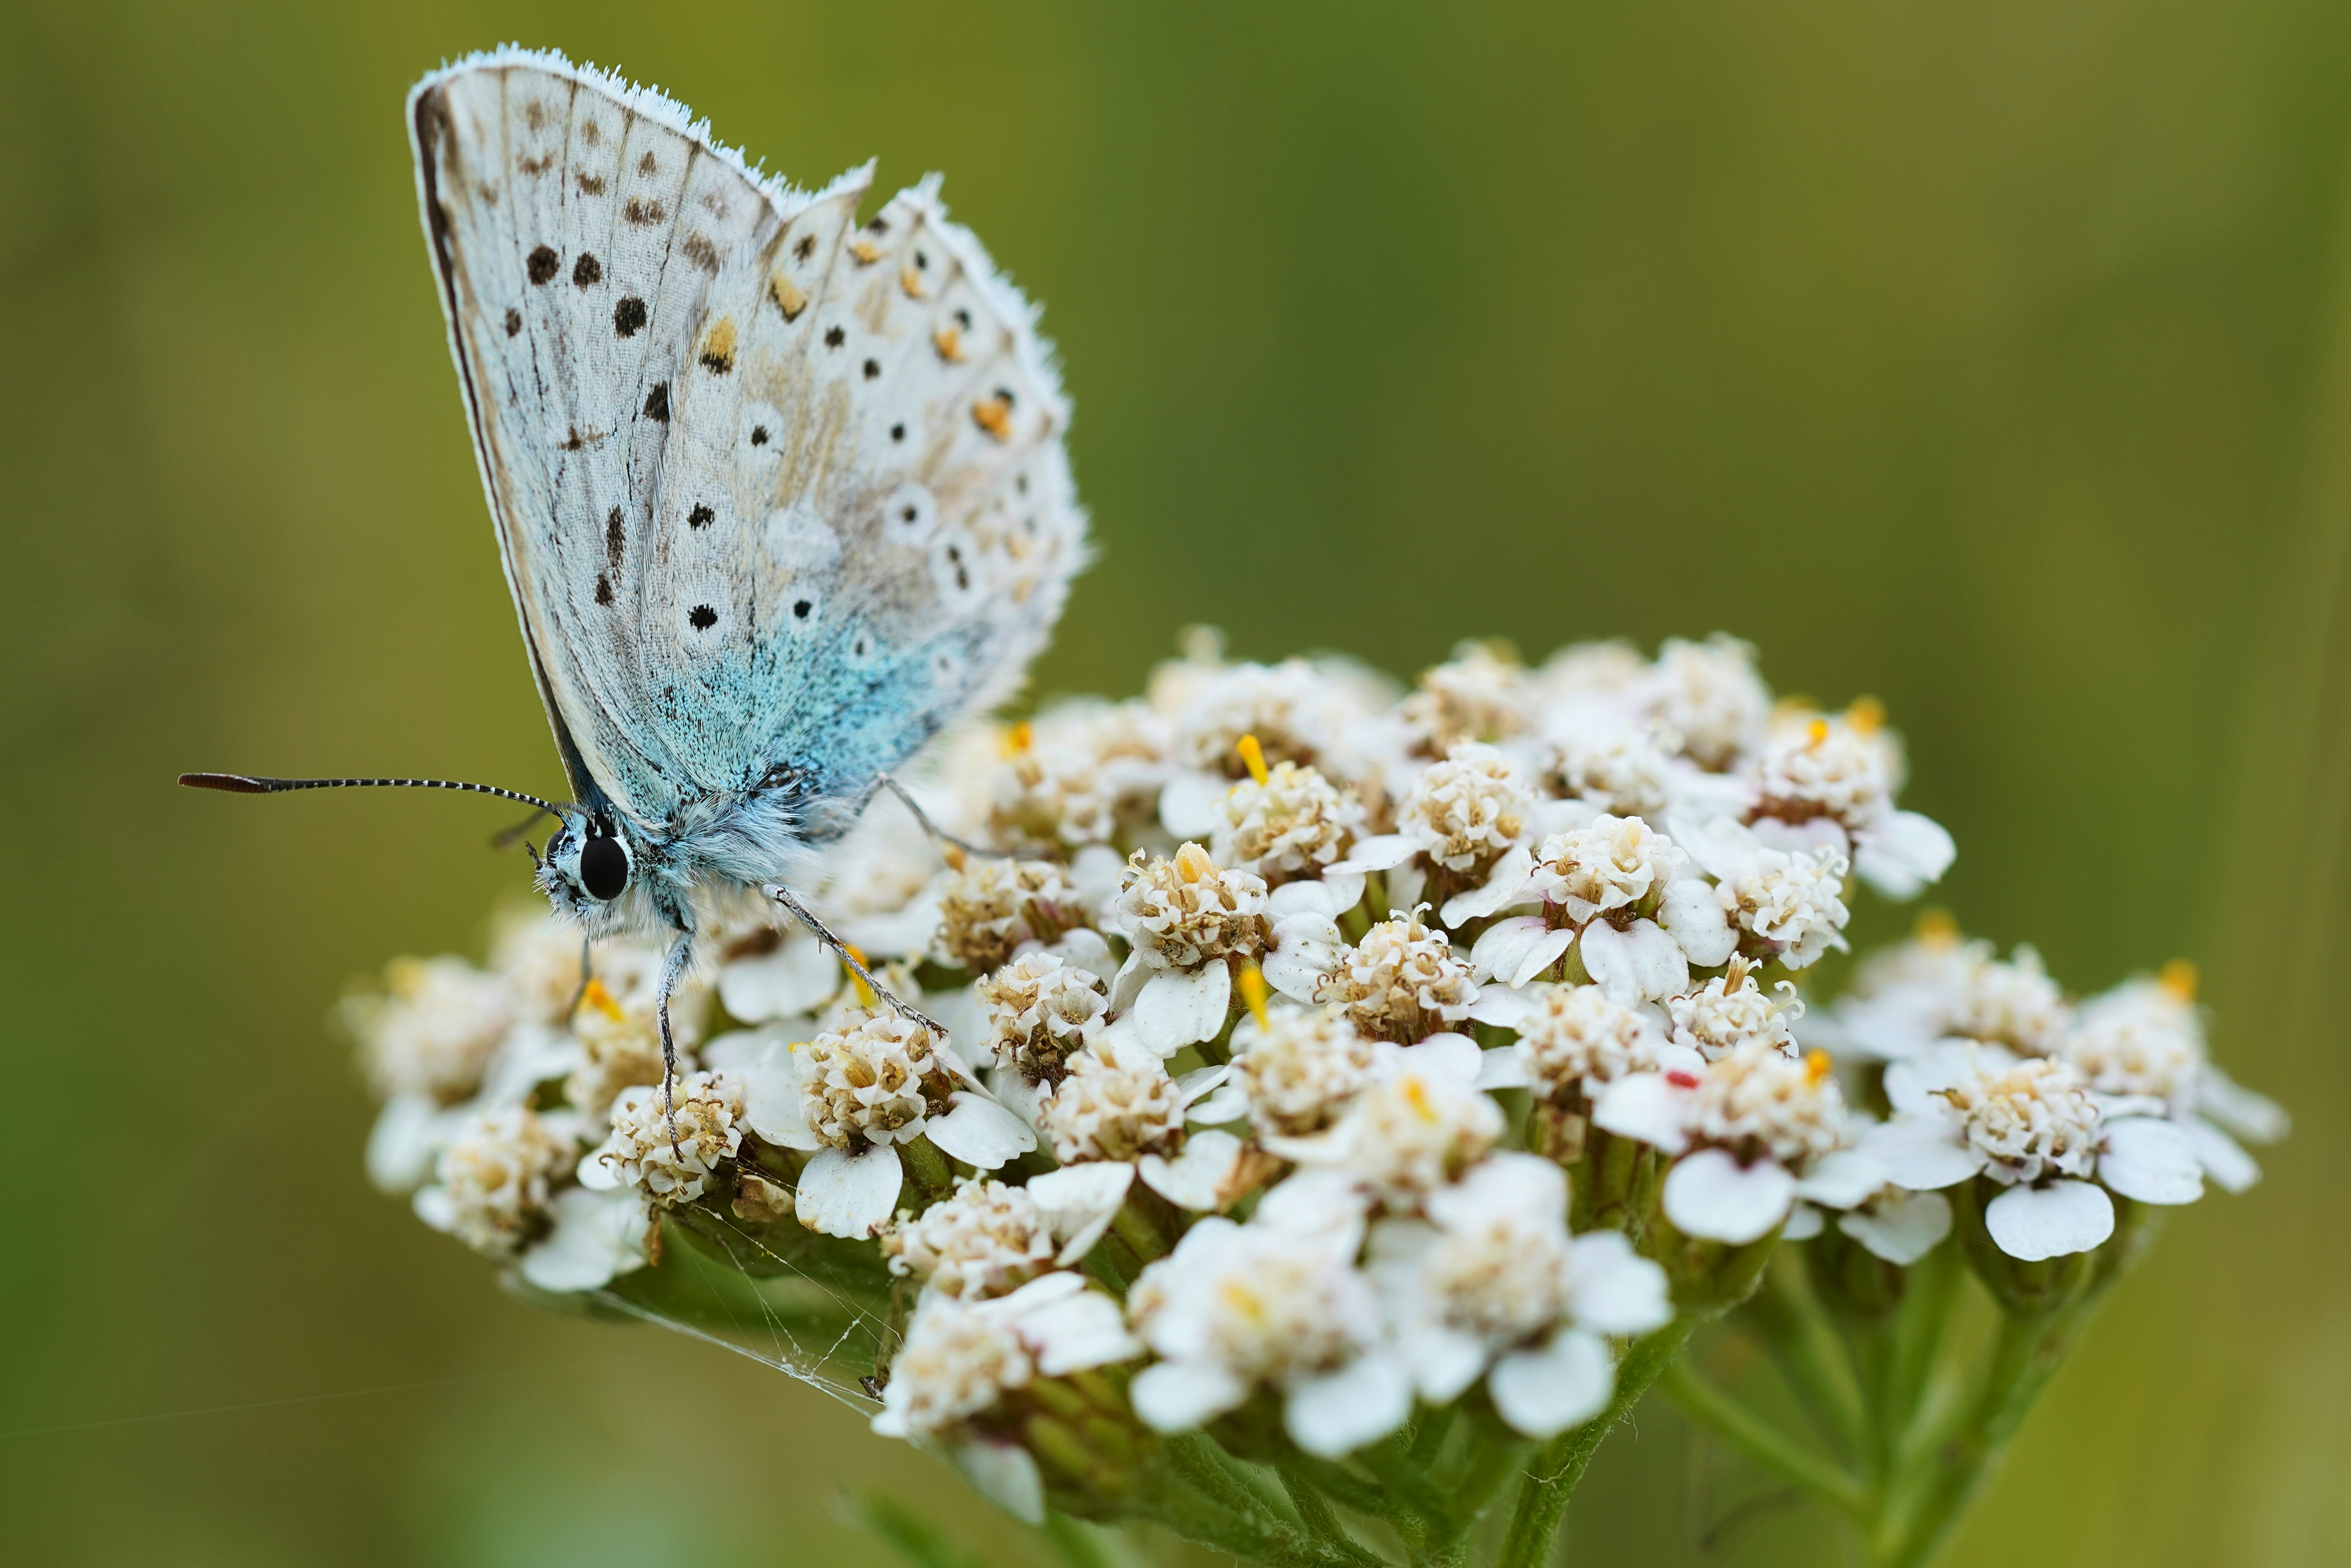 common blue butterfly perched on white flower in close up photography during daytime